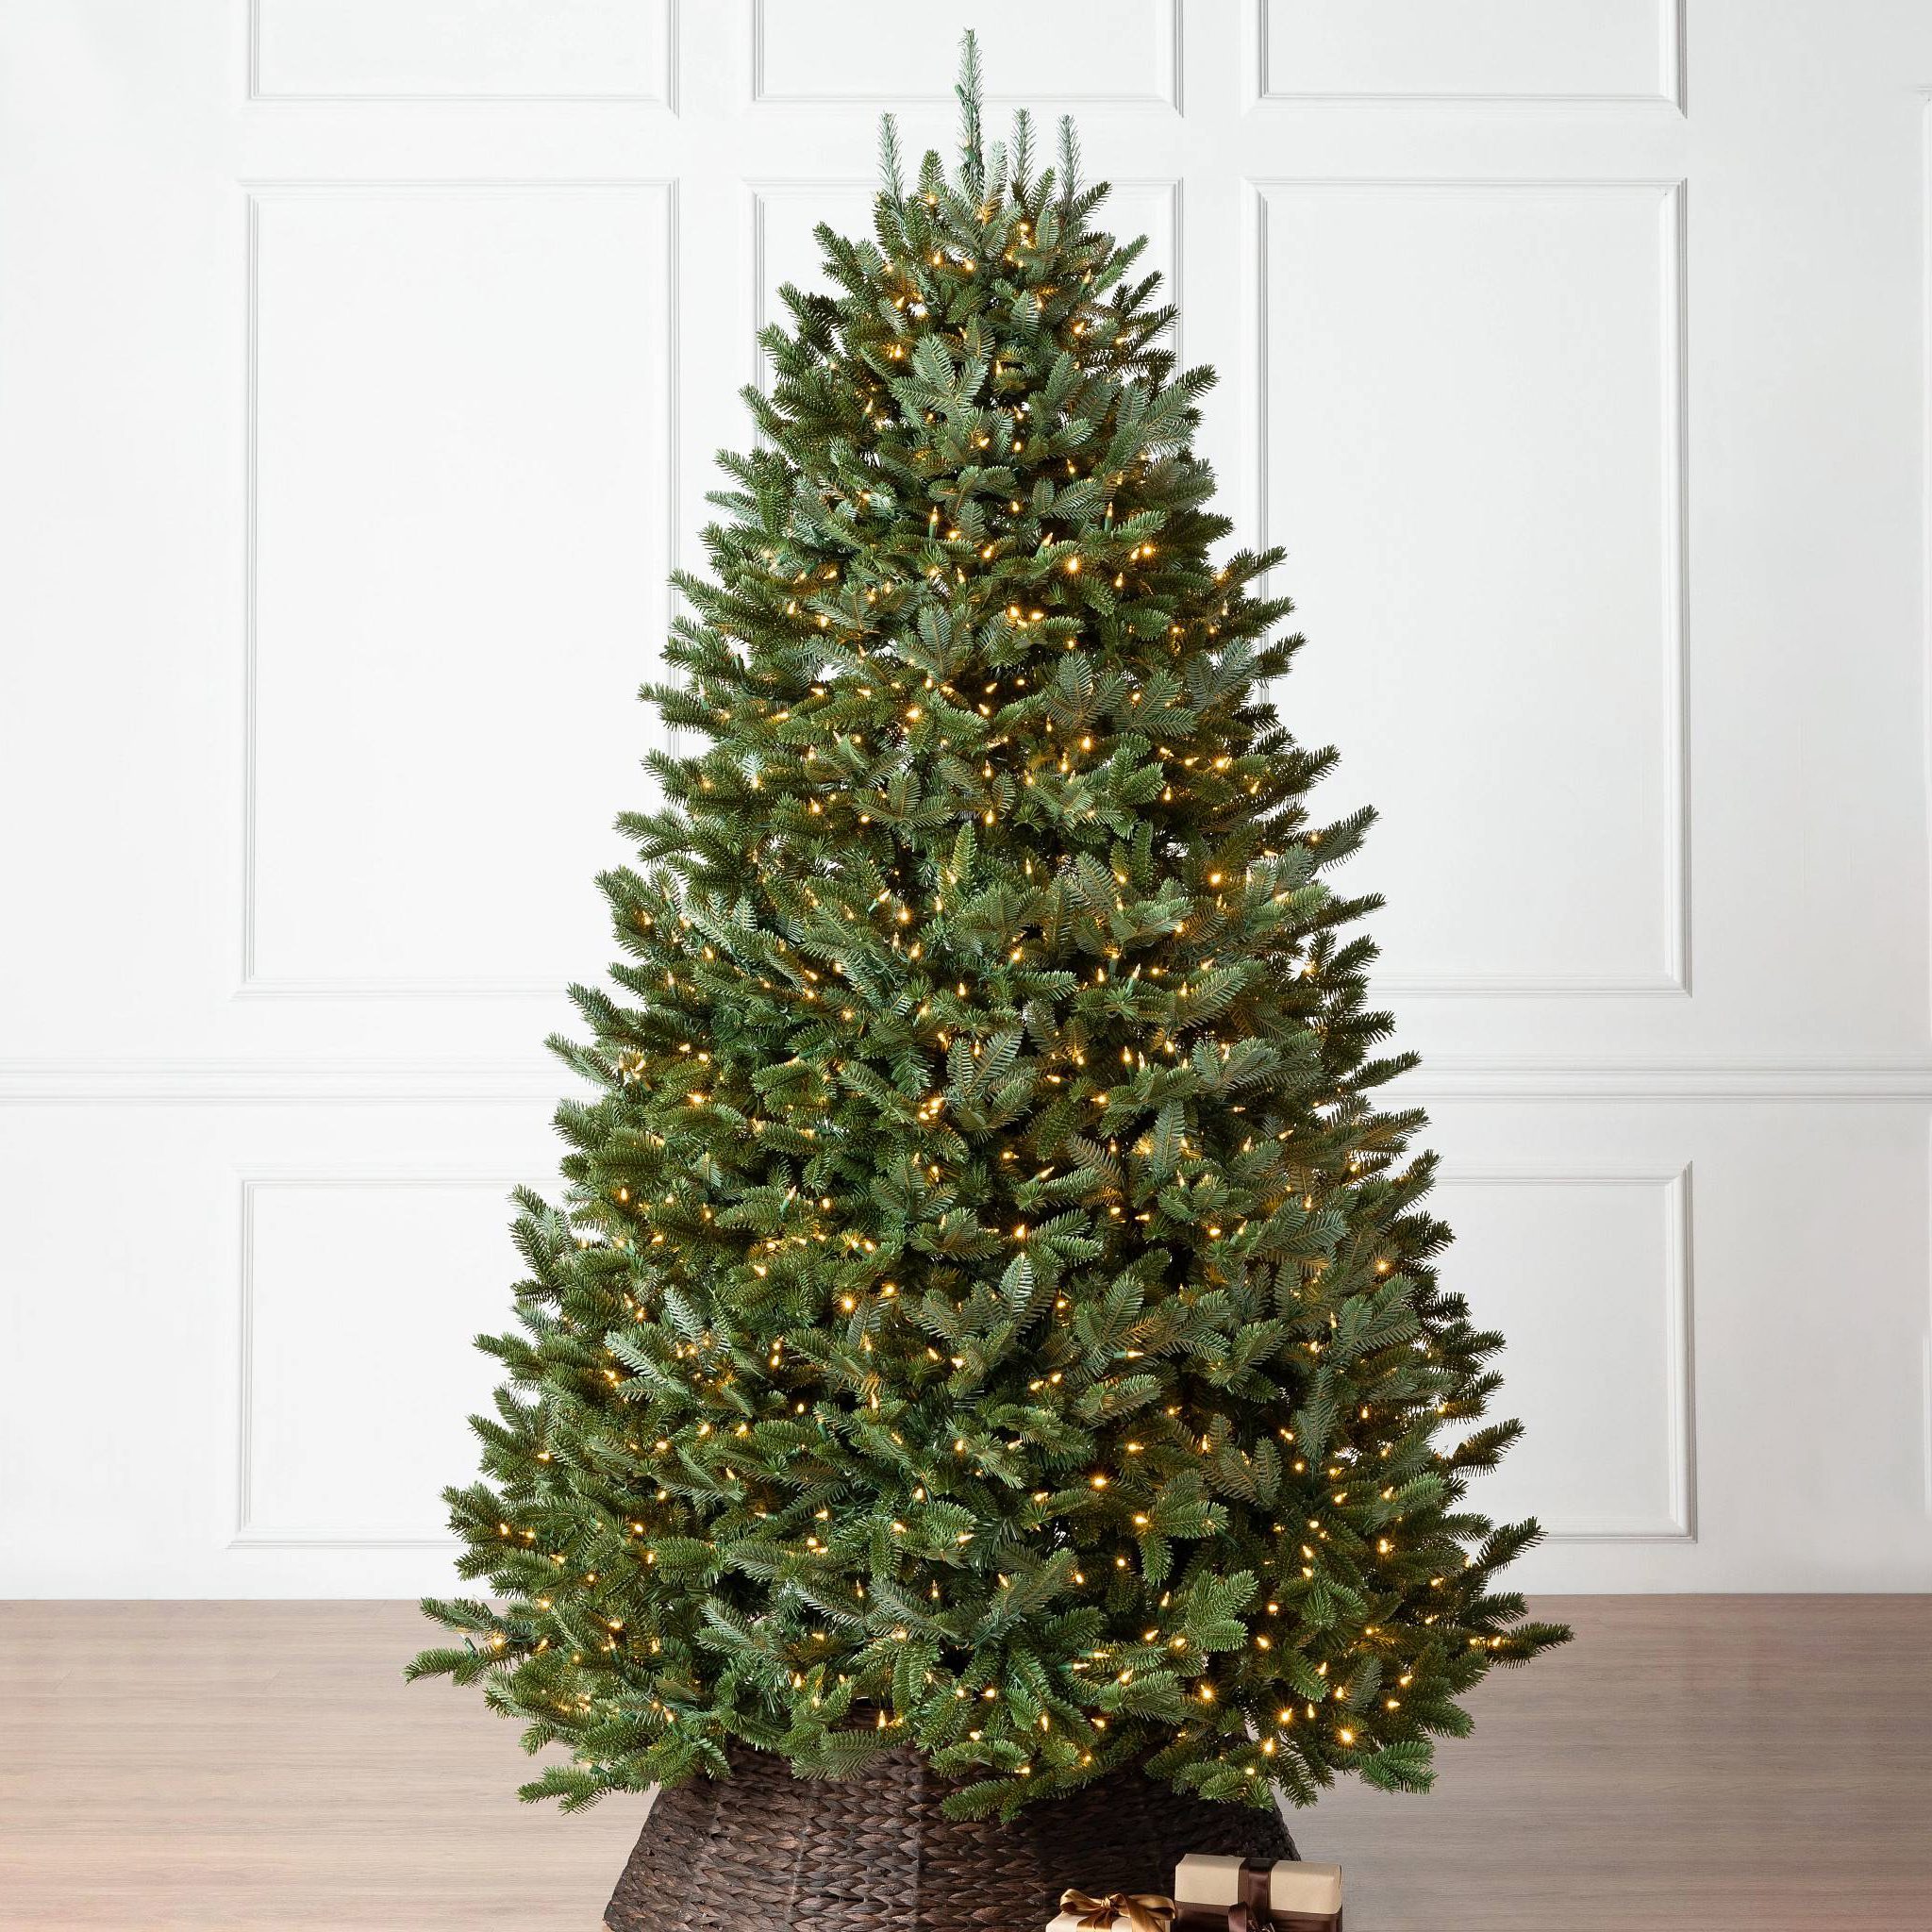 15 Best Artificial Christmas Trees to Buy in 2022 Every Style and Budget